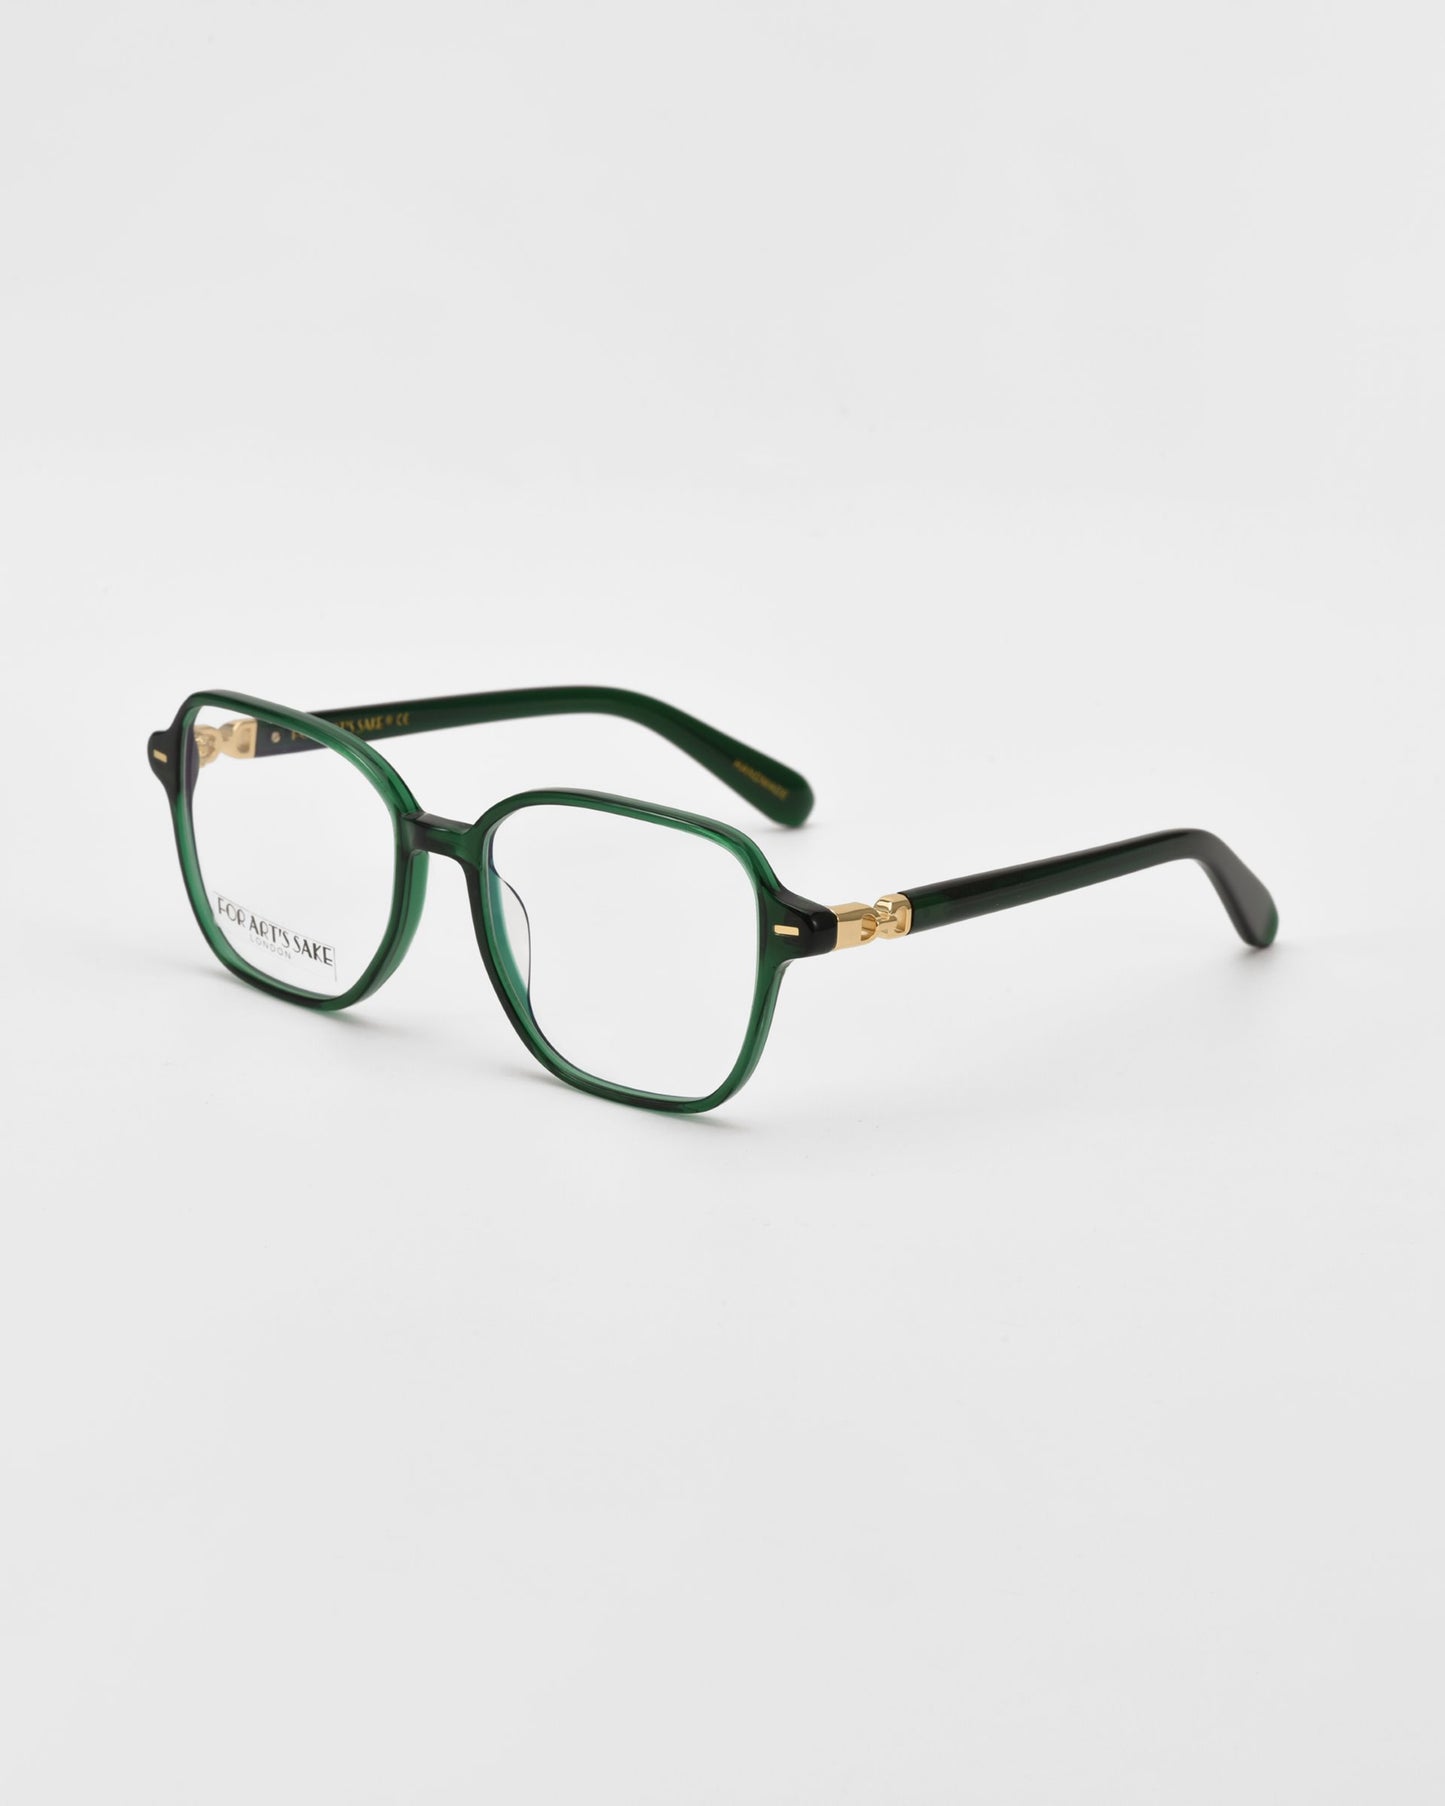 Green cat-eye shaped optical glasses on a white background facing sideways accentuating the gold temples.